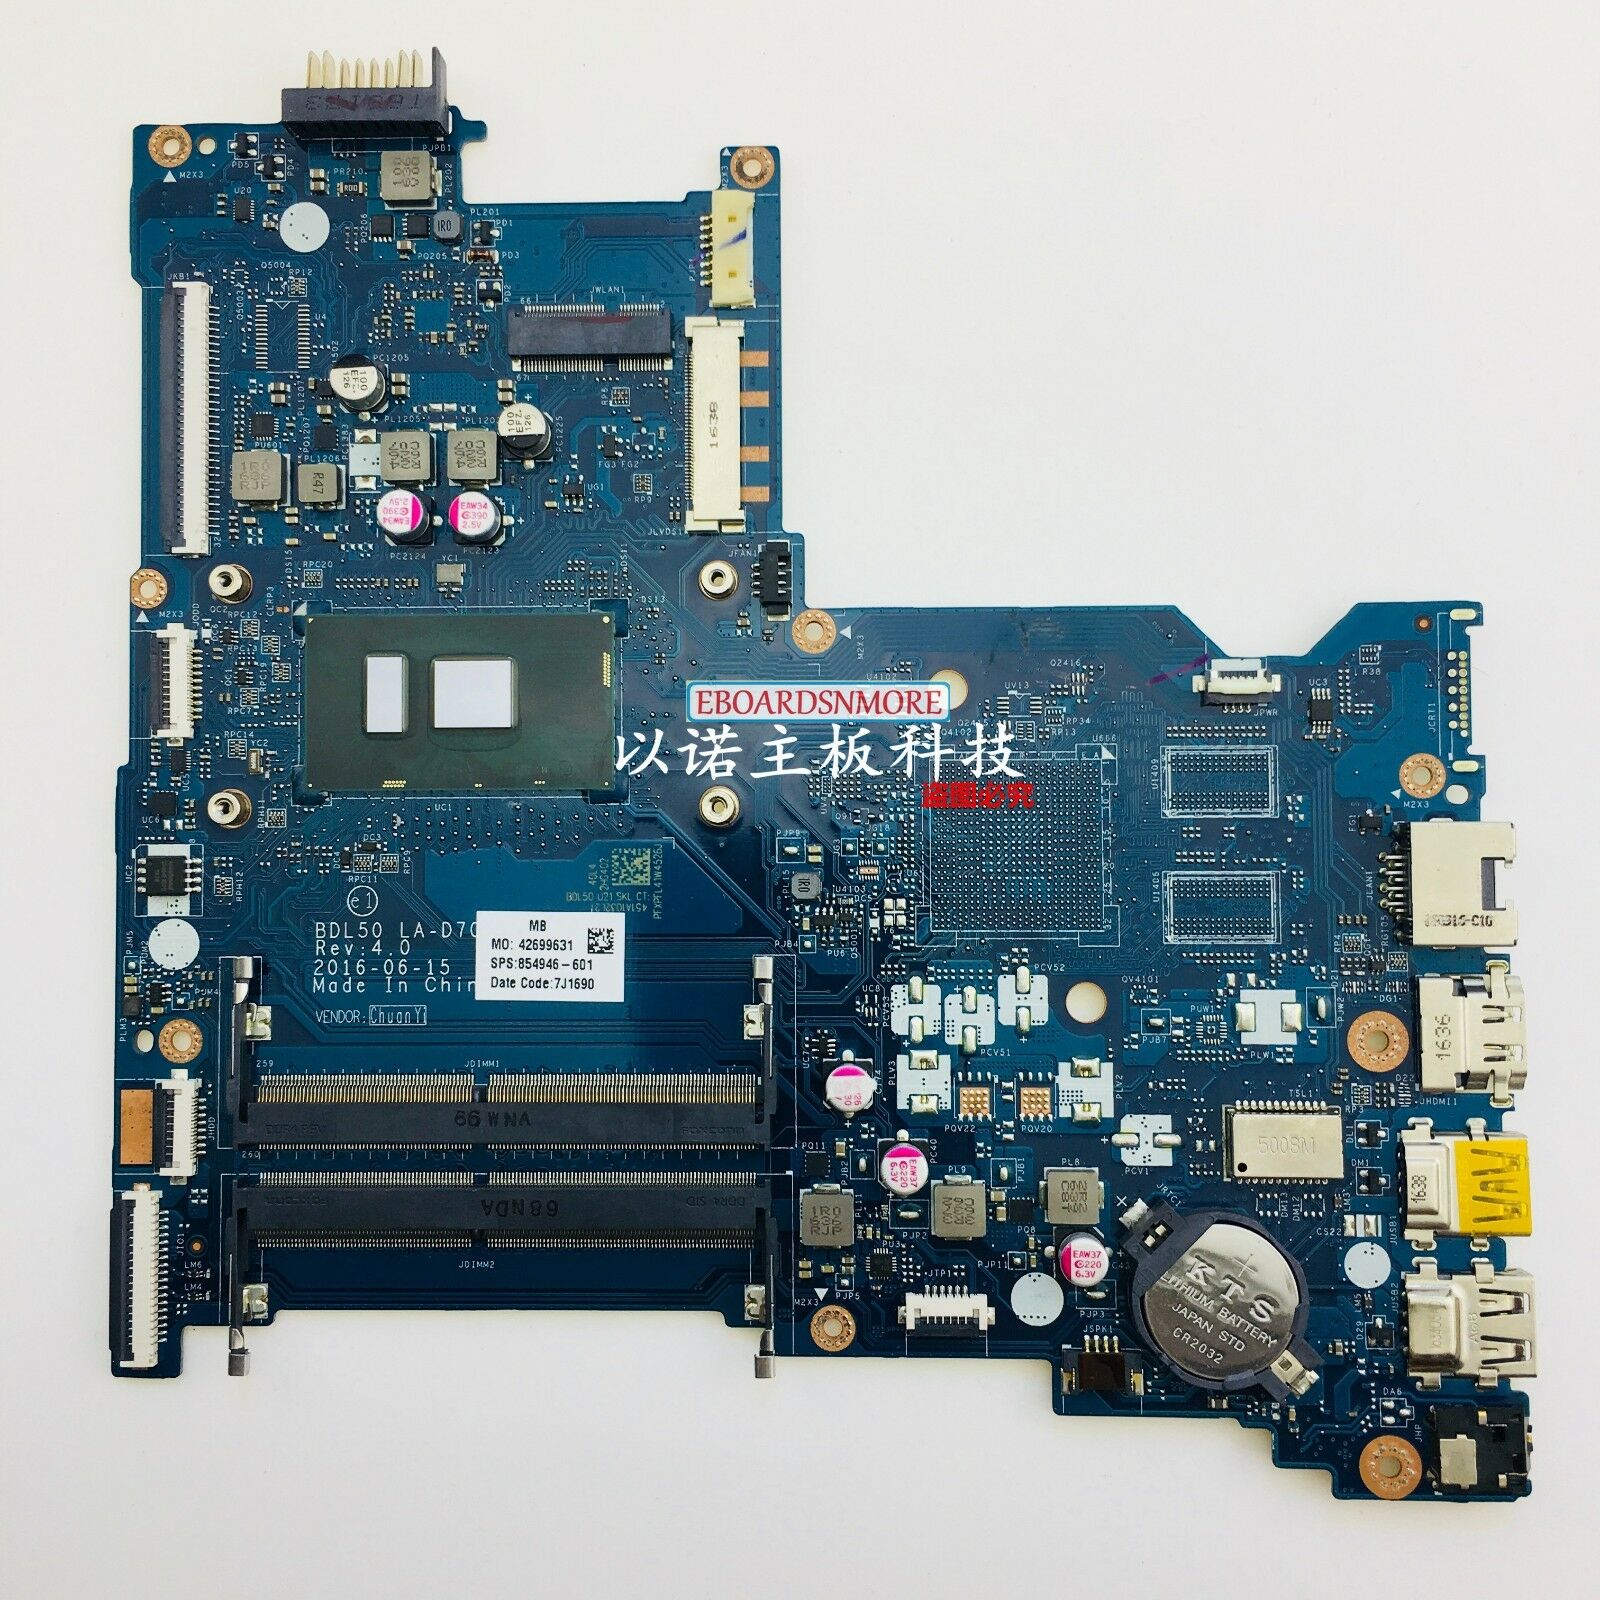 854946-601 I3-6100U Motherboard for HP 15-AY 15-AY028CA Touch Laptop LA-D704P A Compatible CPU Brand: Intel